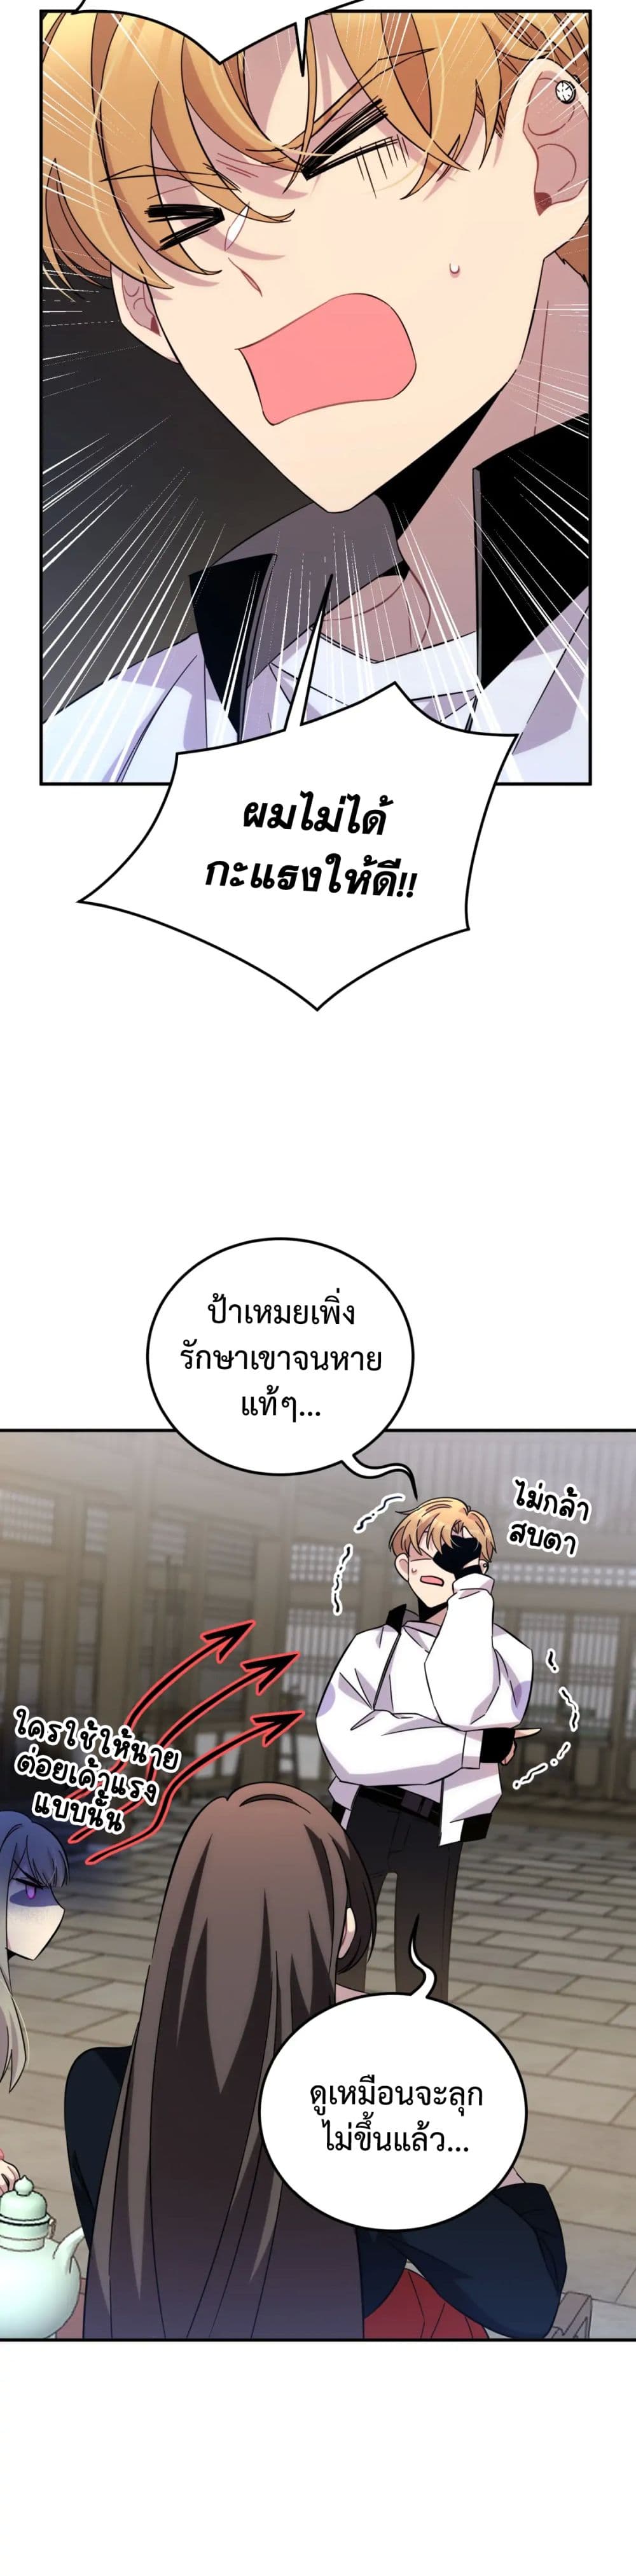 Anemone Dead or Alive ตอนที่ 11 (8)